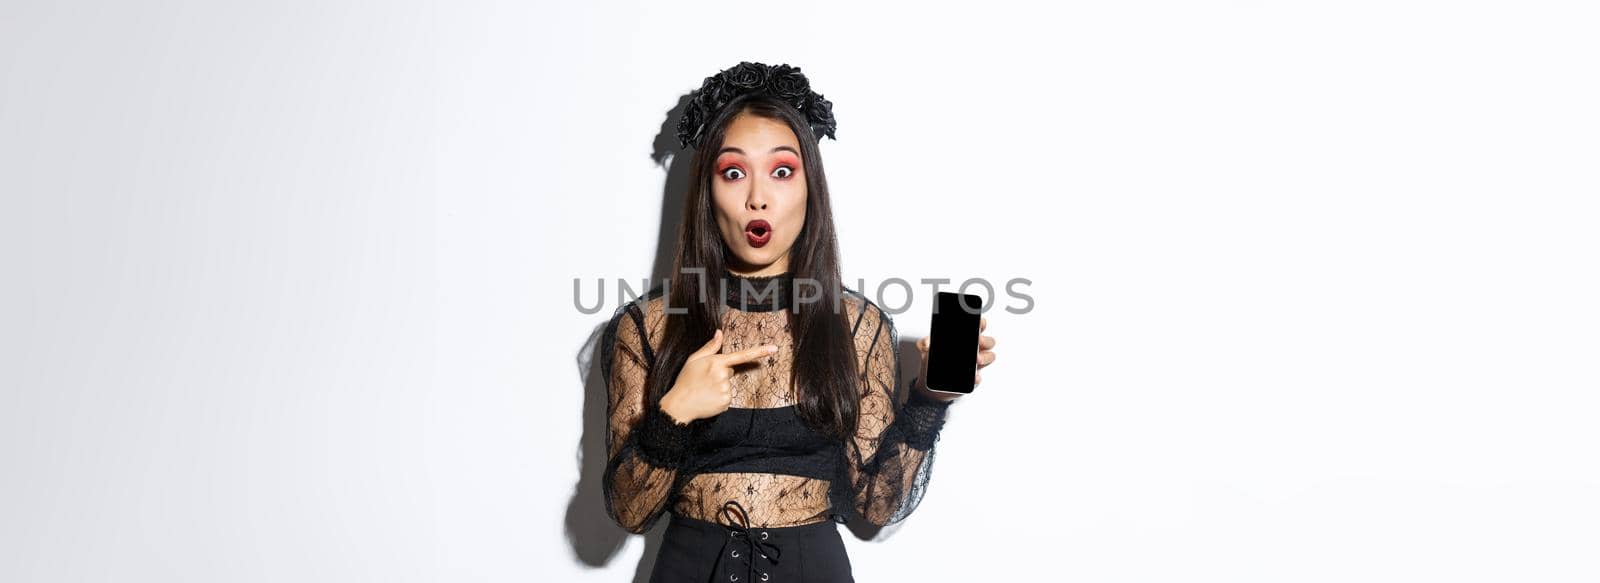 Surprised asian girl in black gothic dress with wreath, gasping amused and pointing finger at mobile phone display, showing halloween banner or promo, standing over white background.